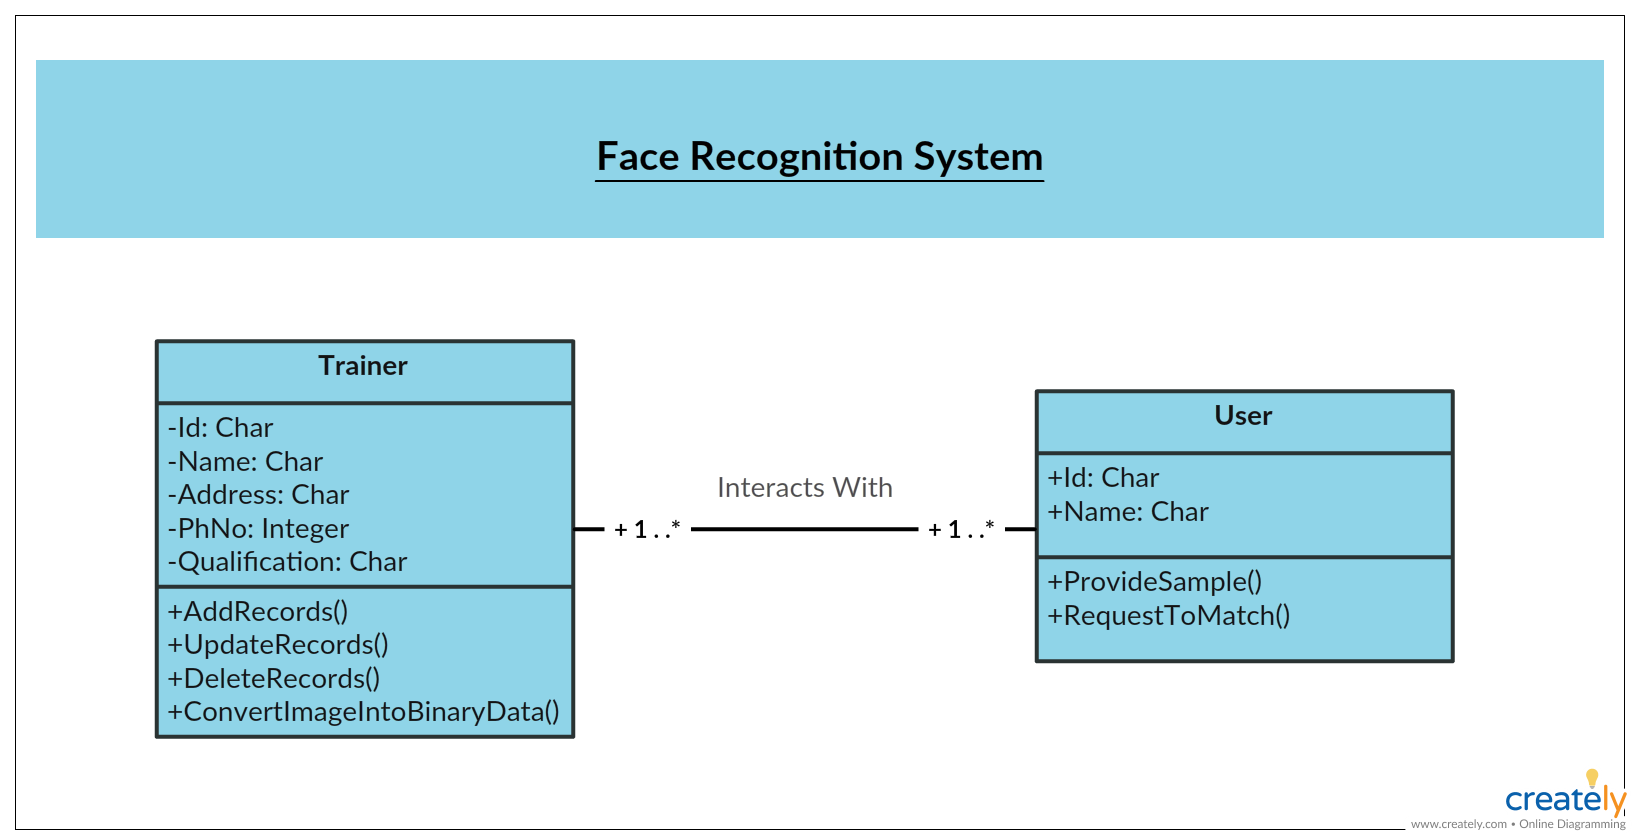 Uml Class Diagram Example - Face Recognition System Class